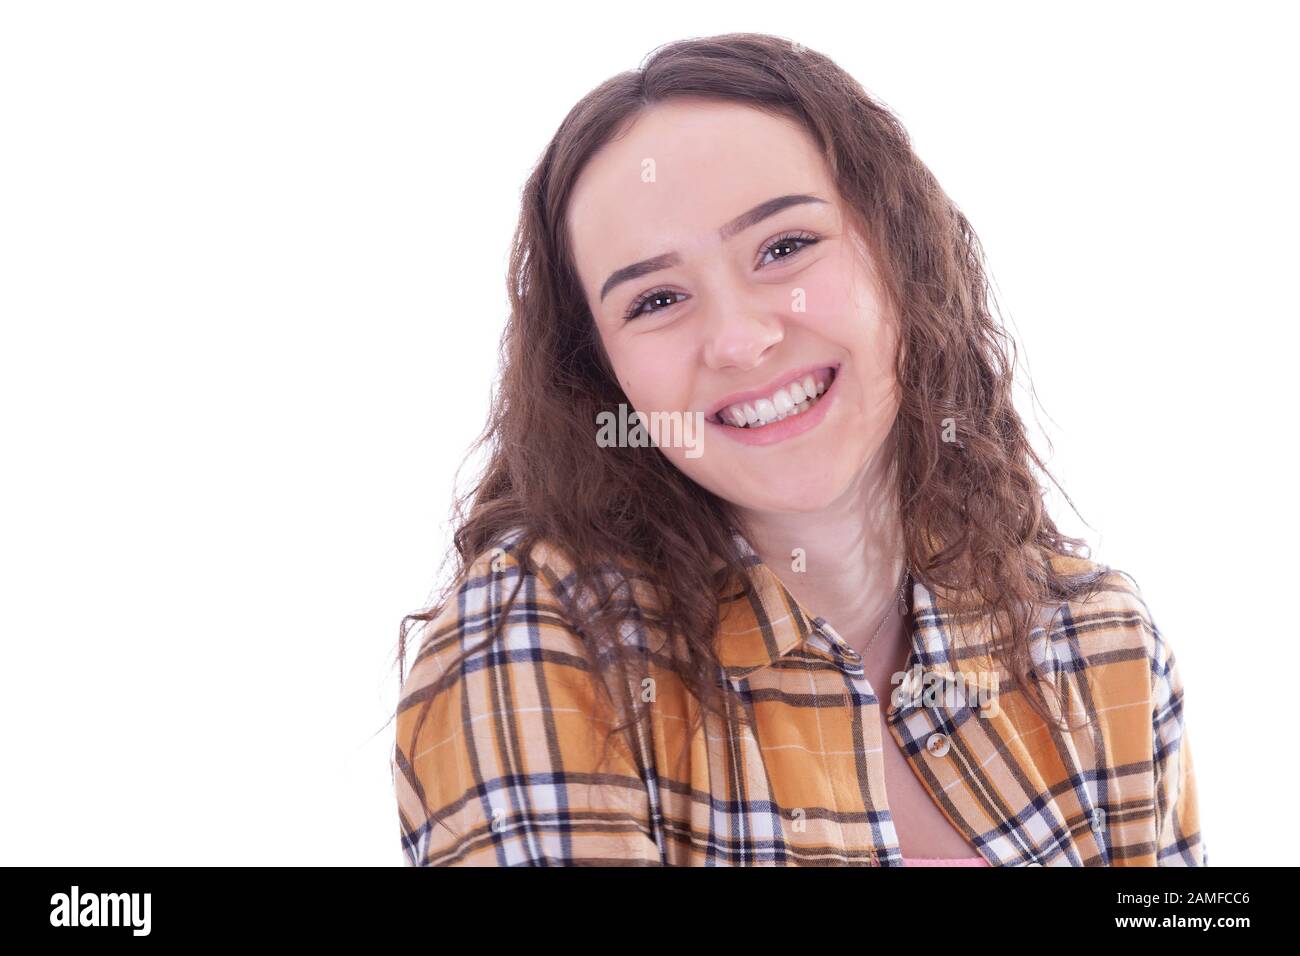 Young girl posing for studio shots against a white background, Stock Photo